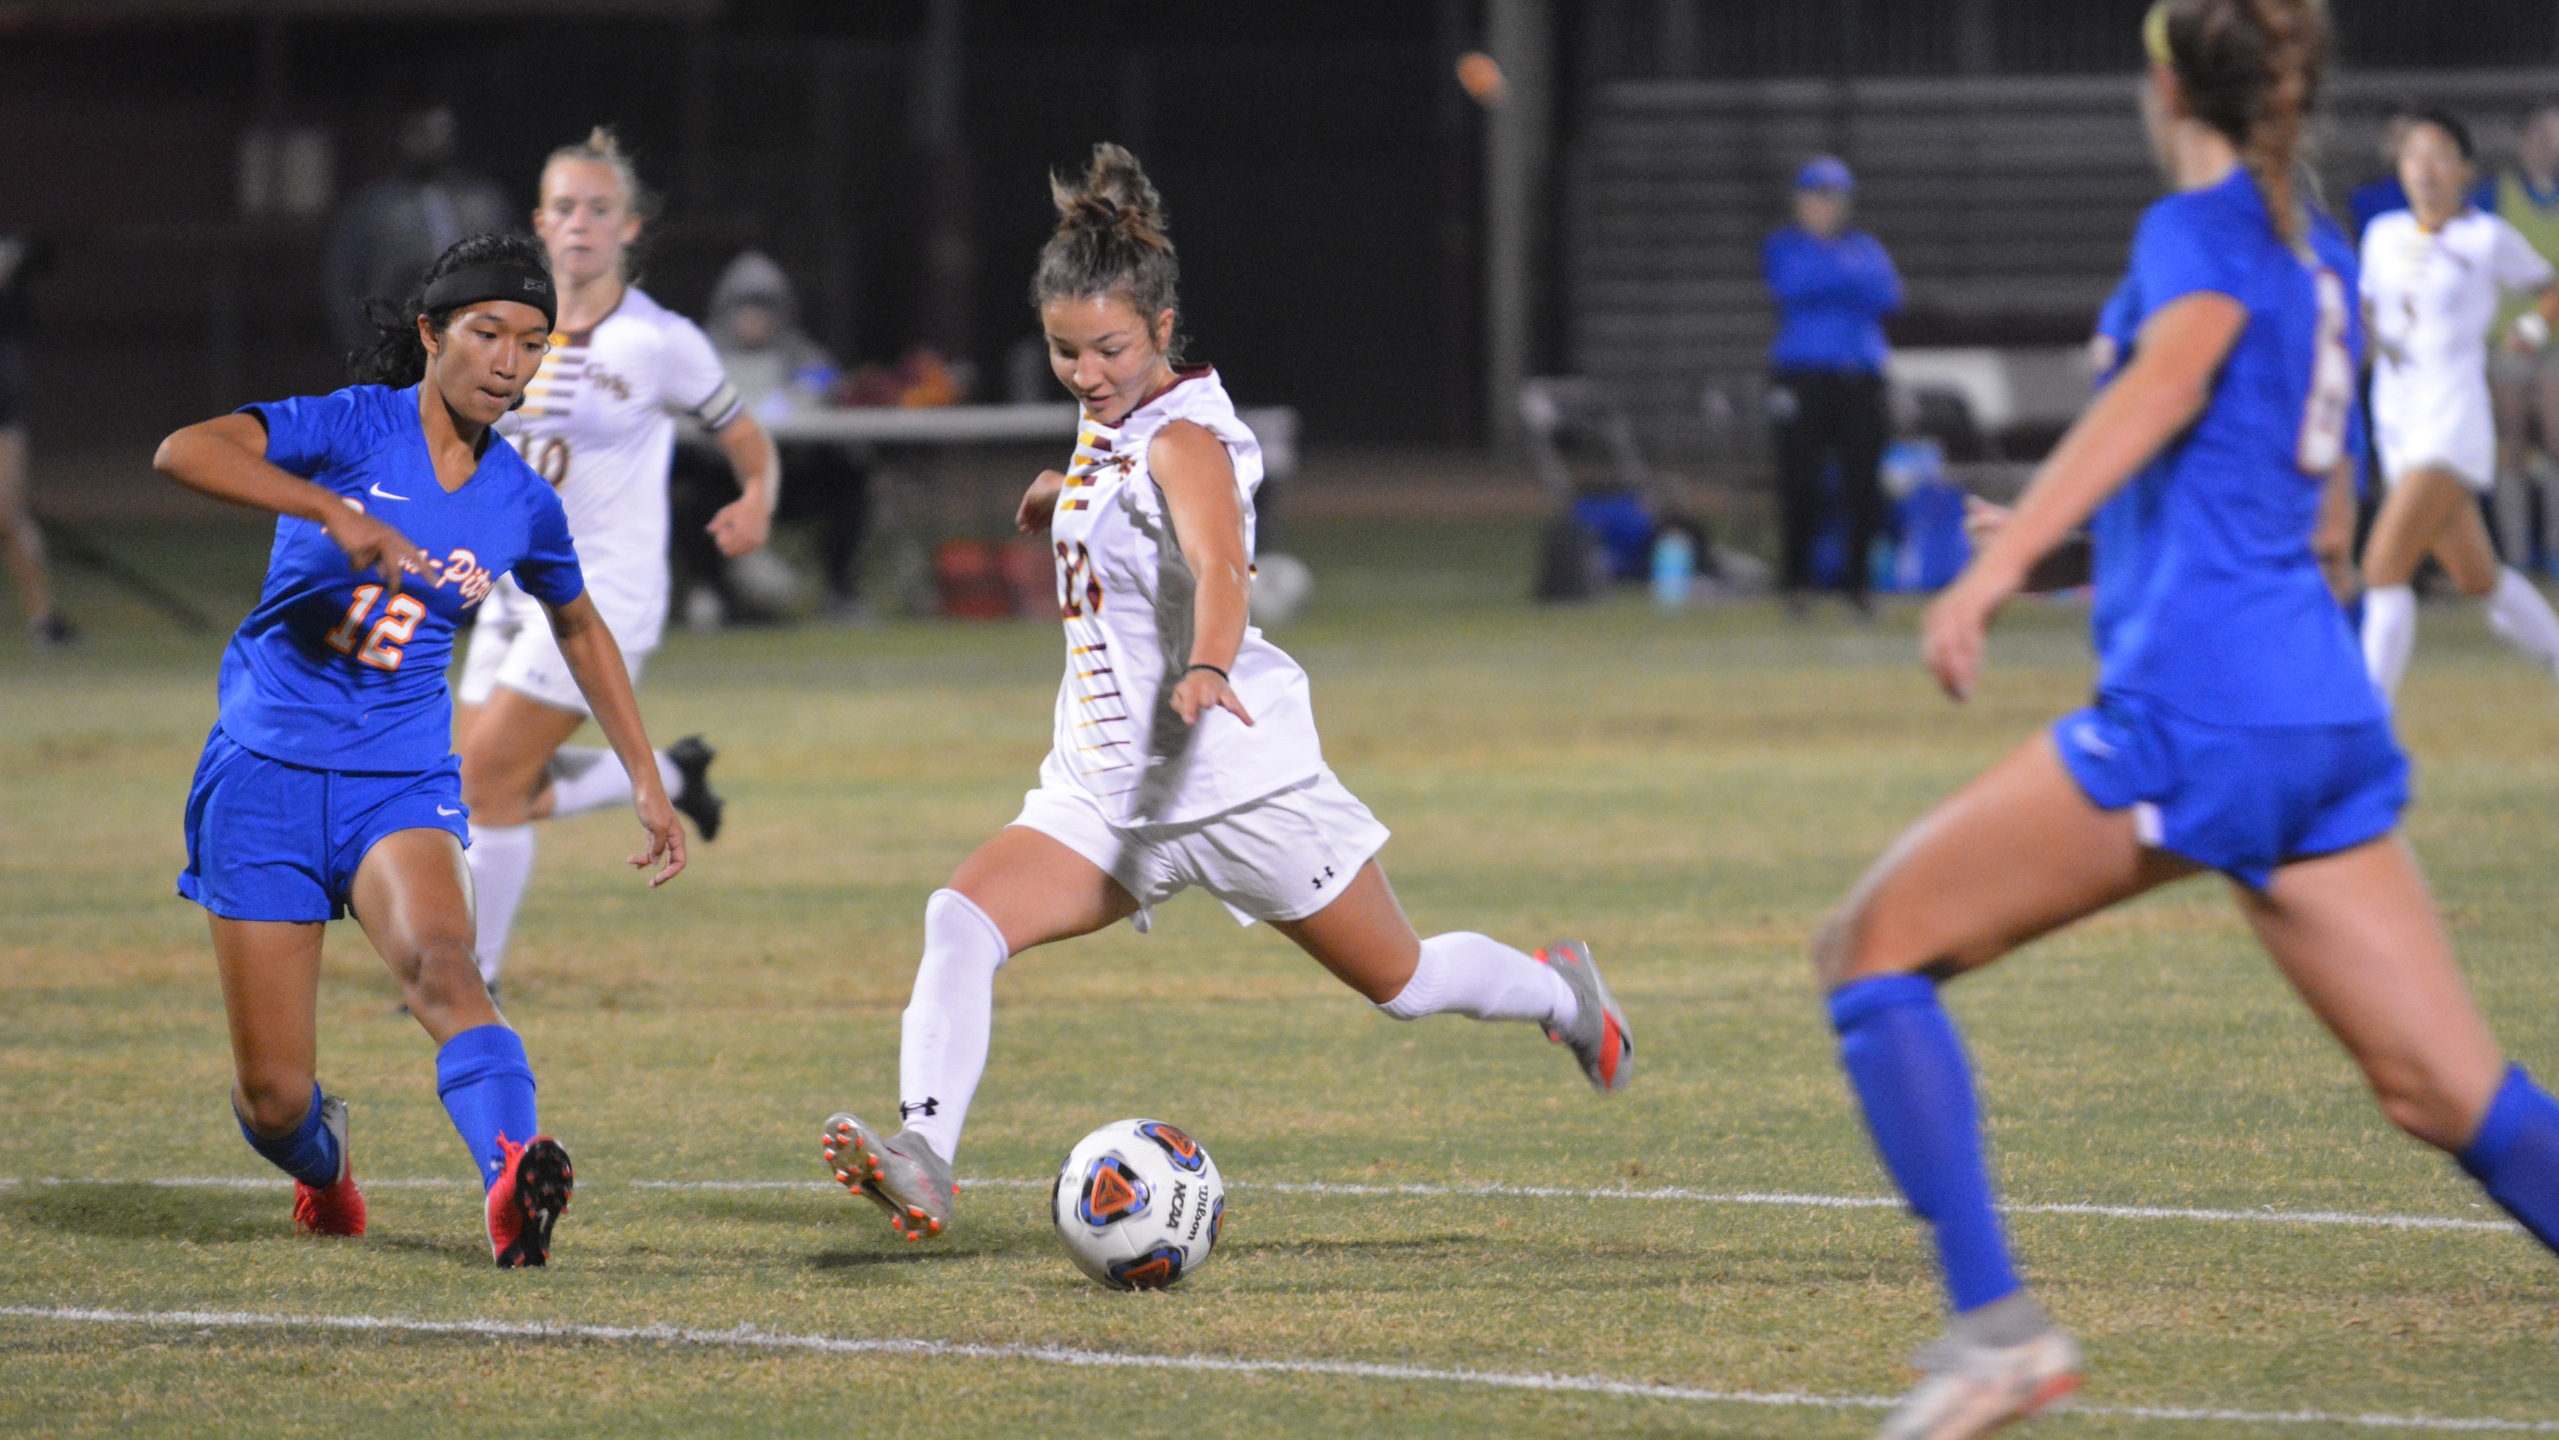 Sunshine D'Elia had the best scoring chance for CMS in the second half (photo by Tessa Guerra)